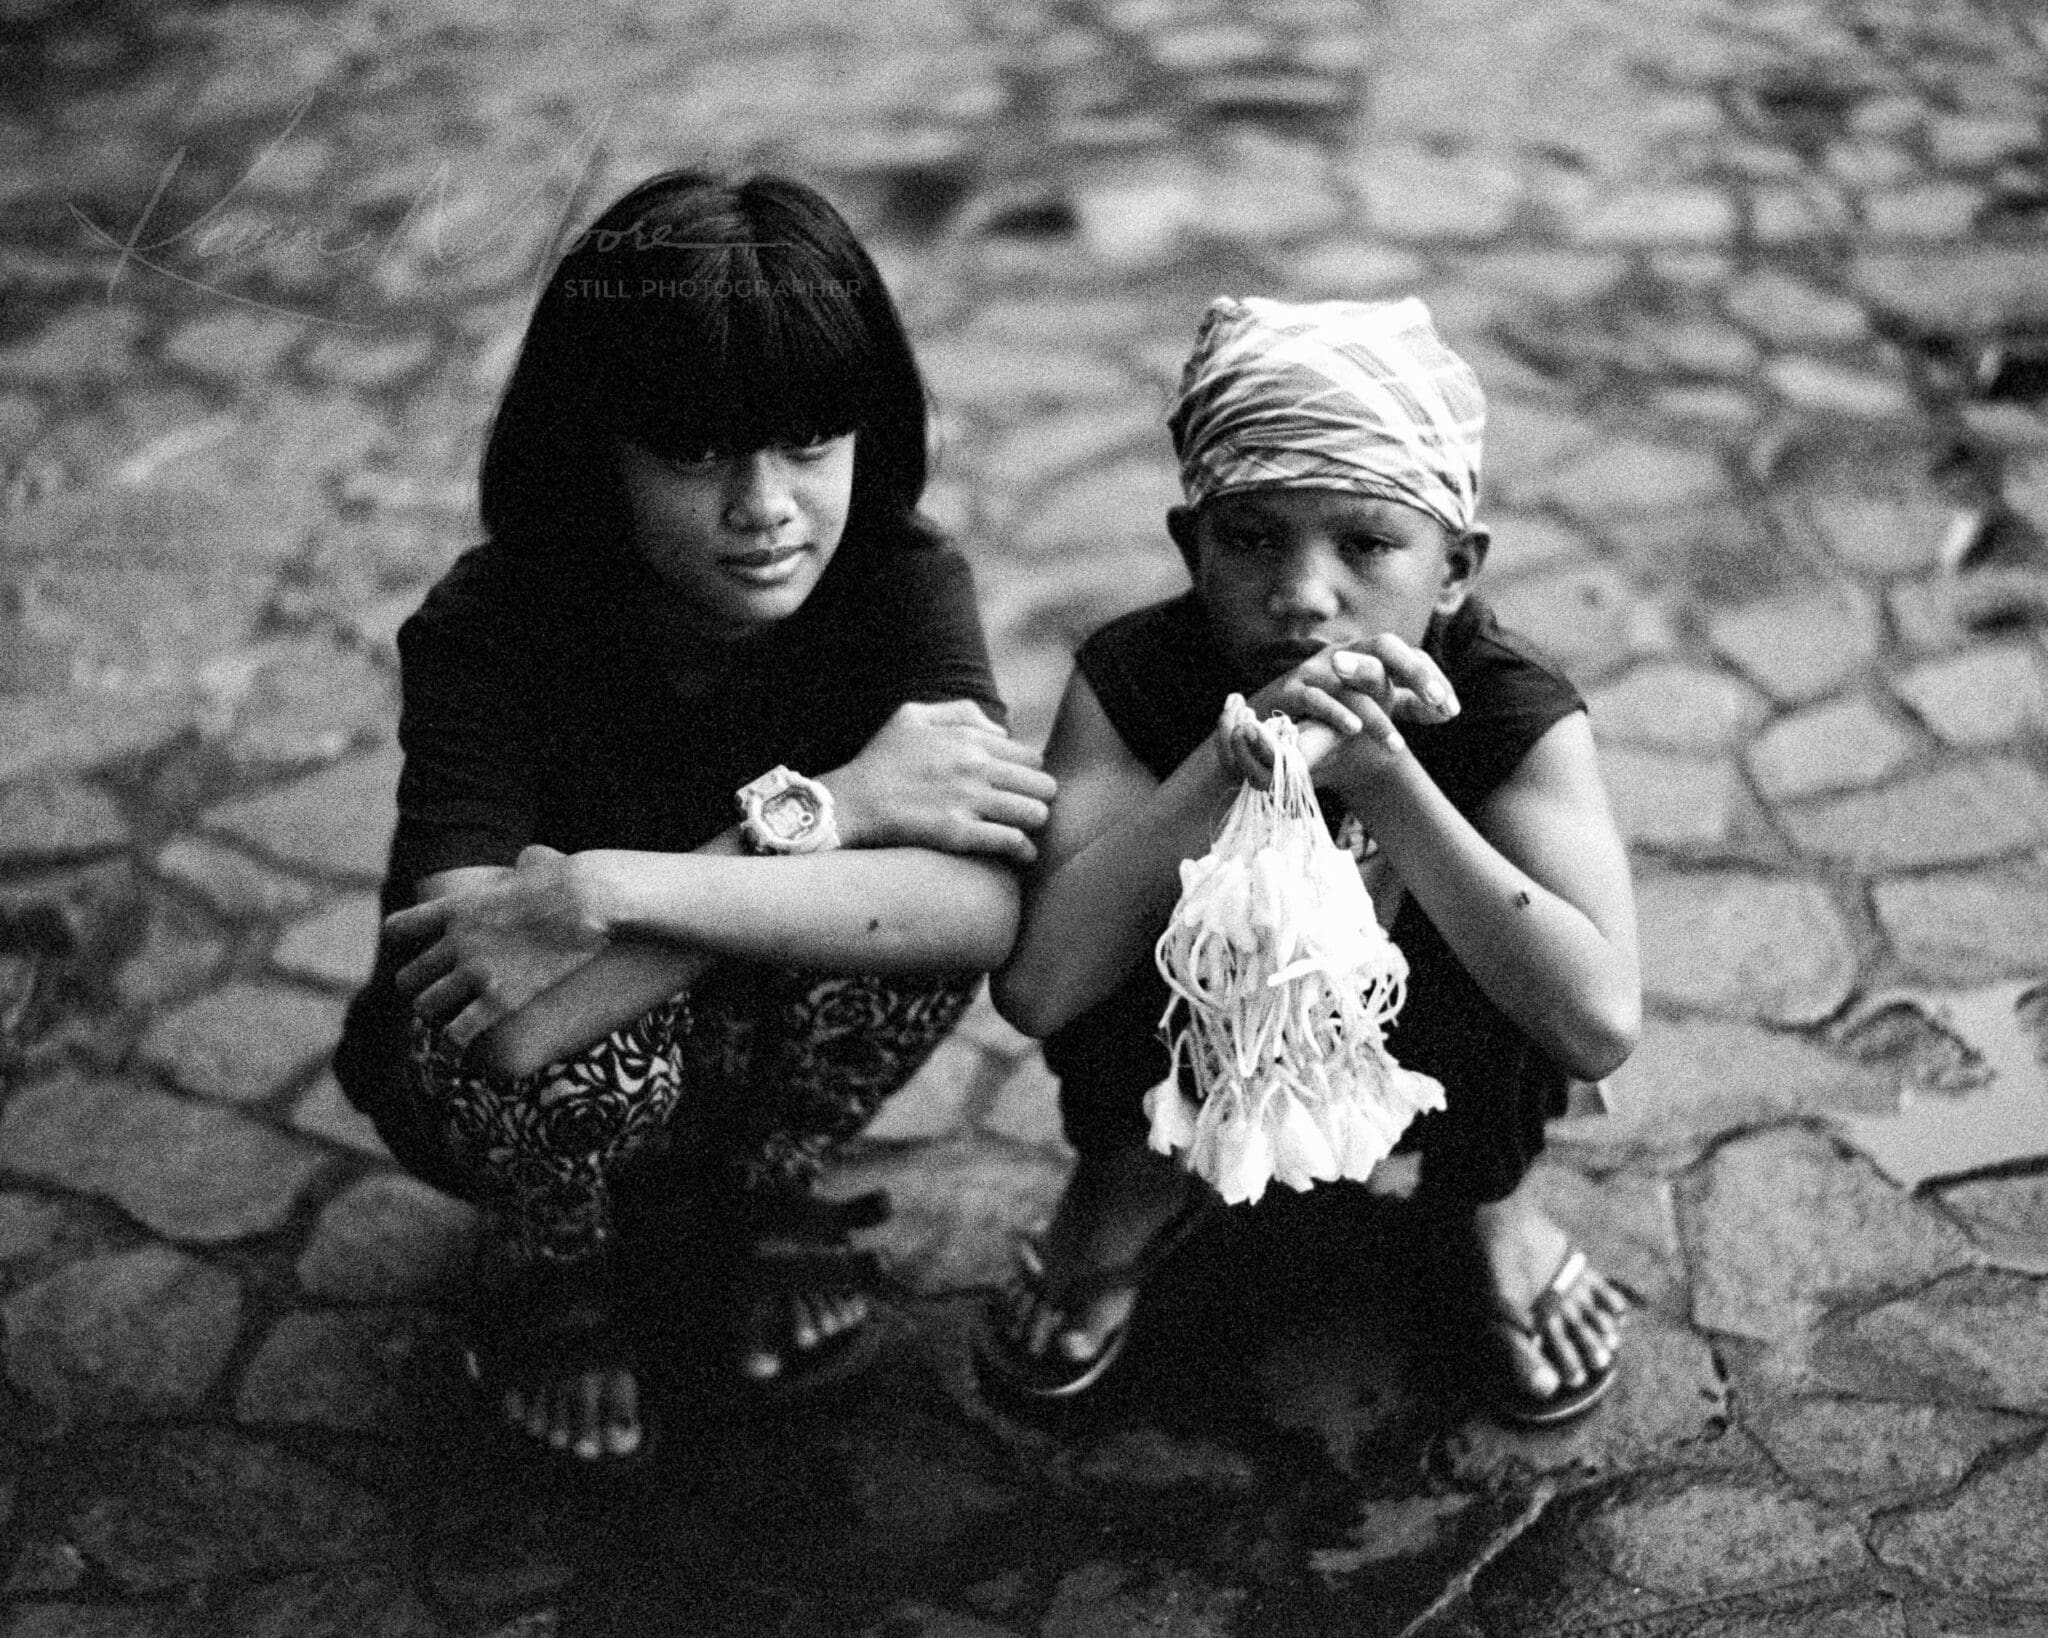 B&W Film photograph of children selling Sampaguita flowers in the Philippines